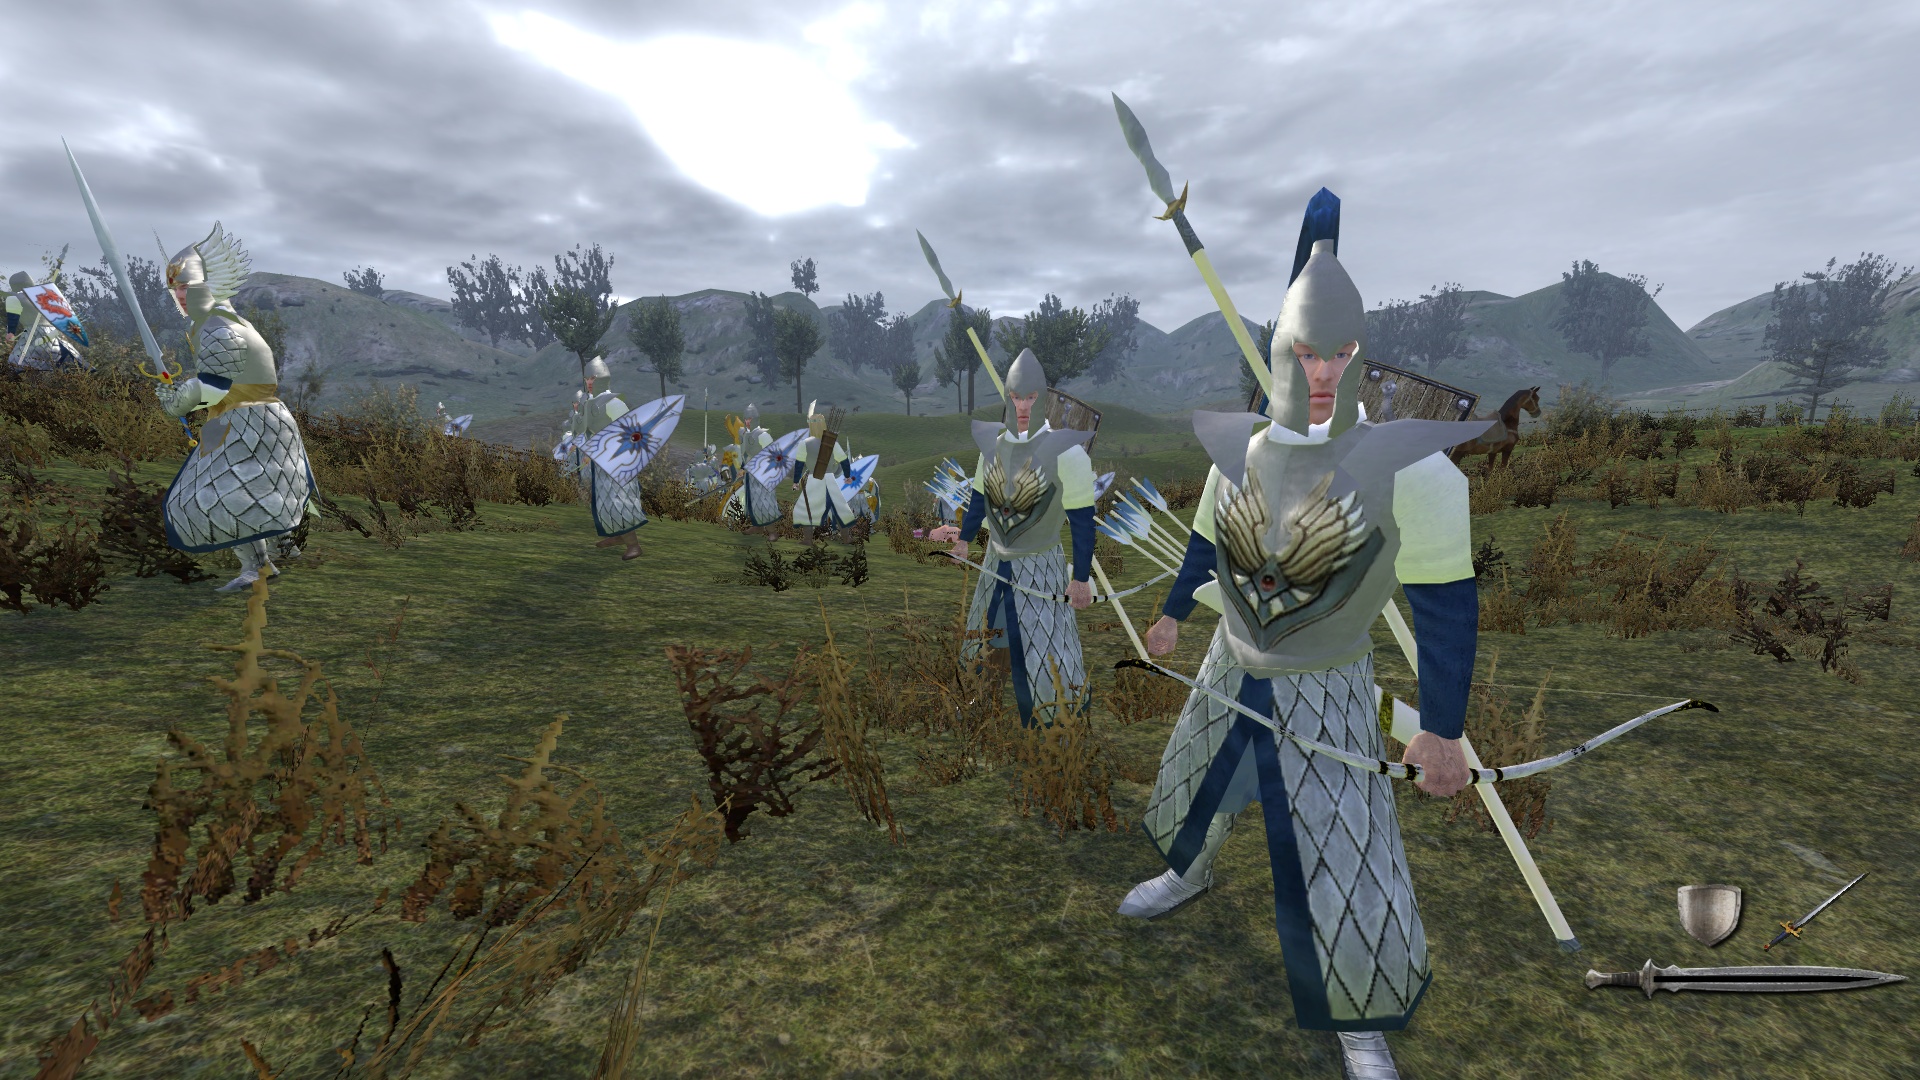 Warband warsword. Warband Warsword Conquest. Mount and Blade Warsword Conquest. Mount and Blade Warband Warsword Conquest. Warsword Conquest Маунт блейд.